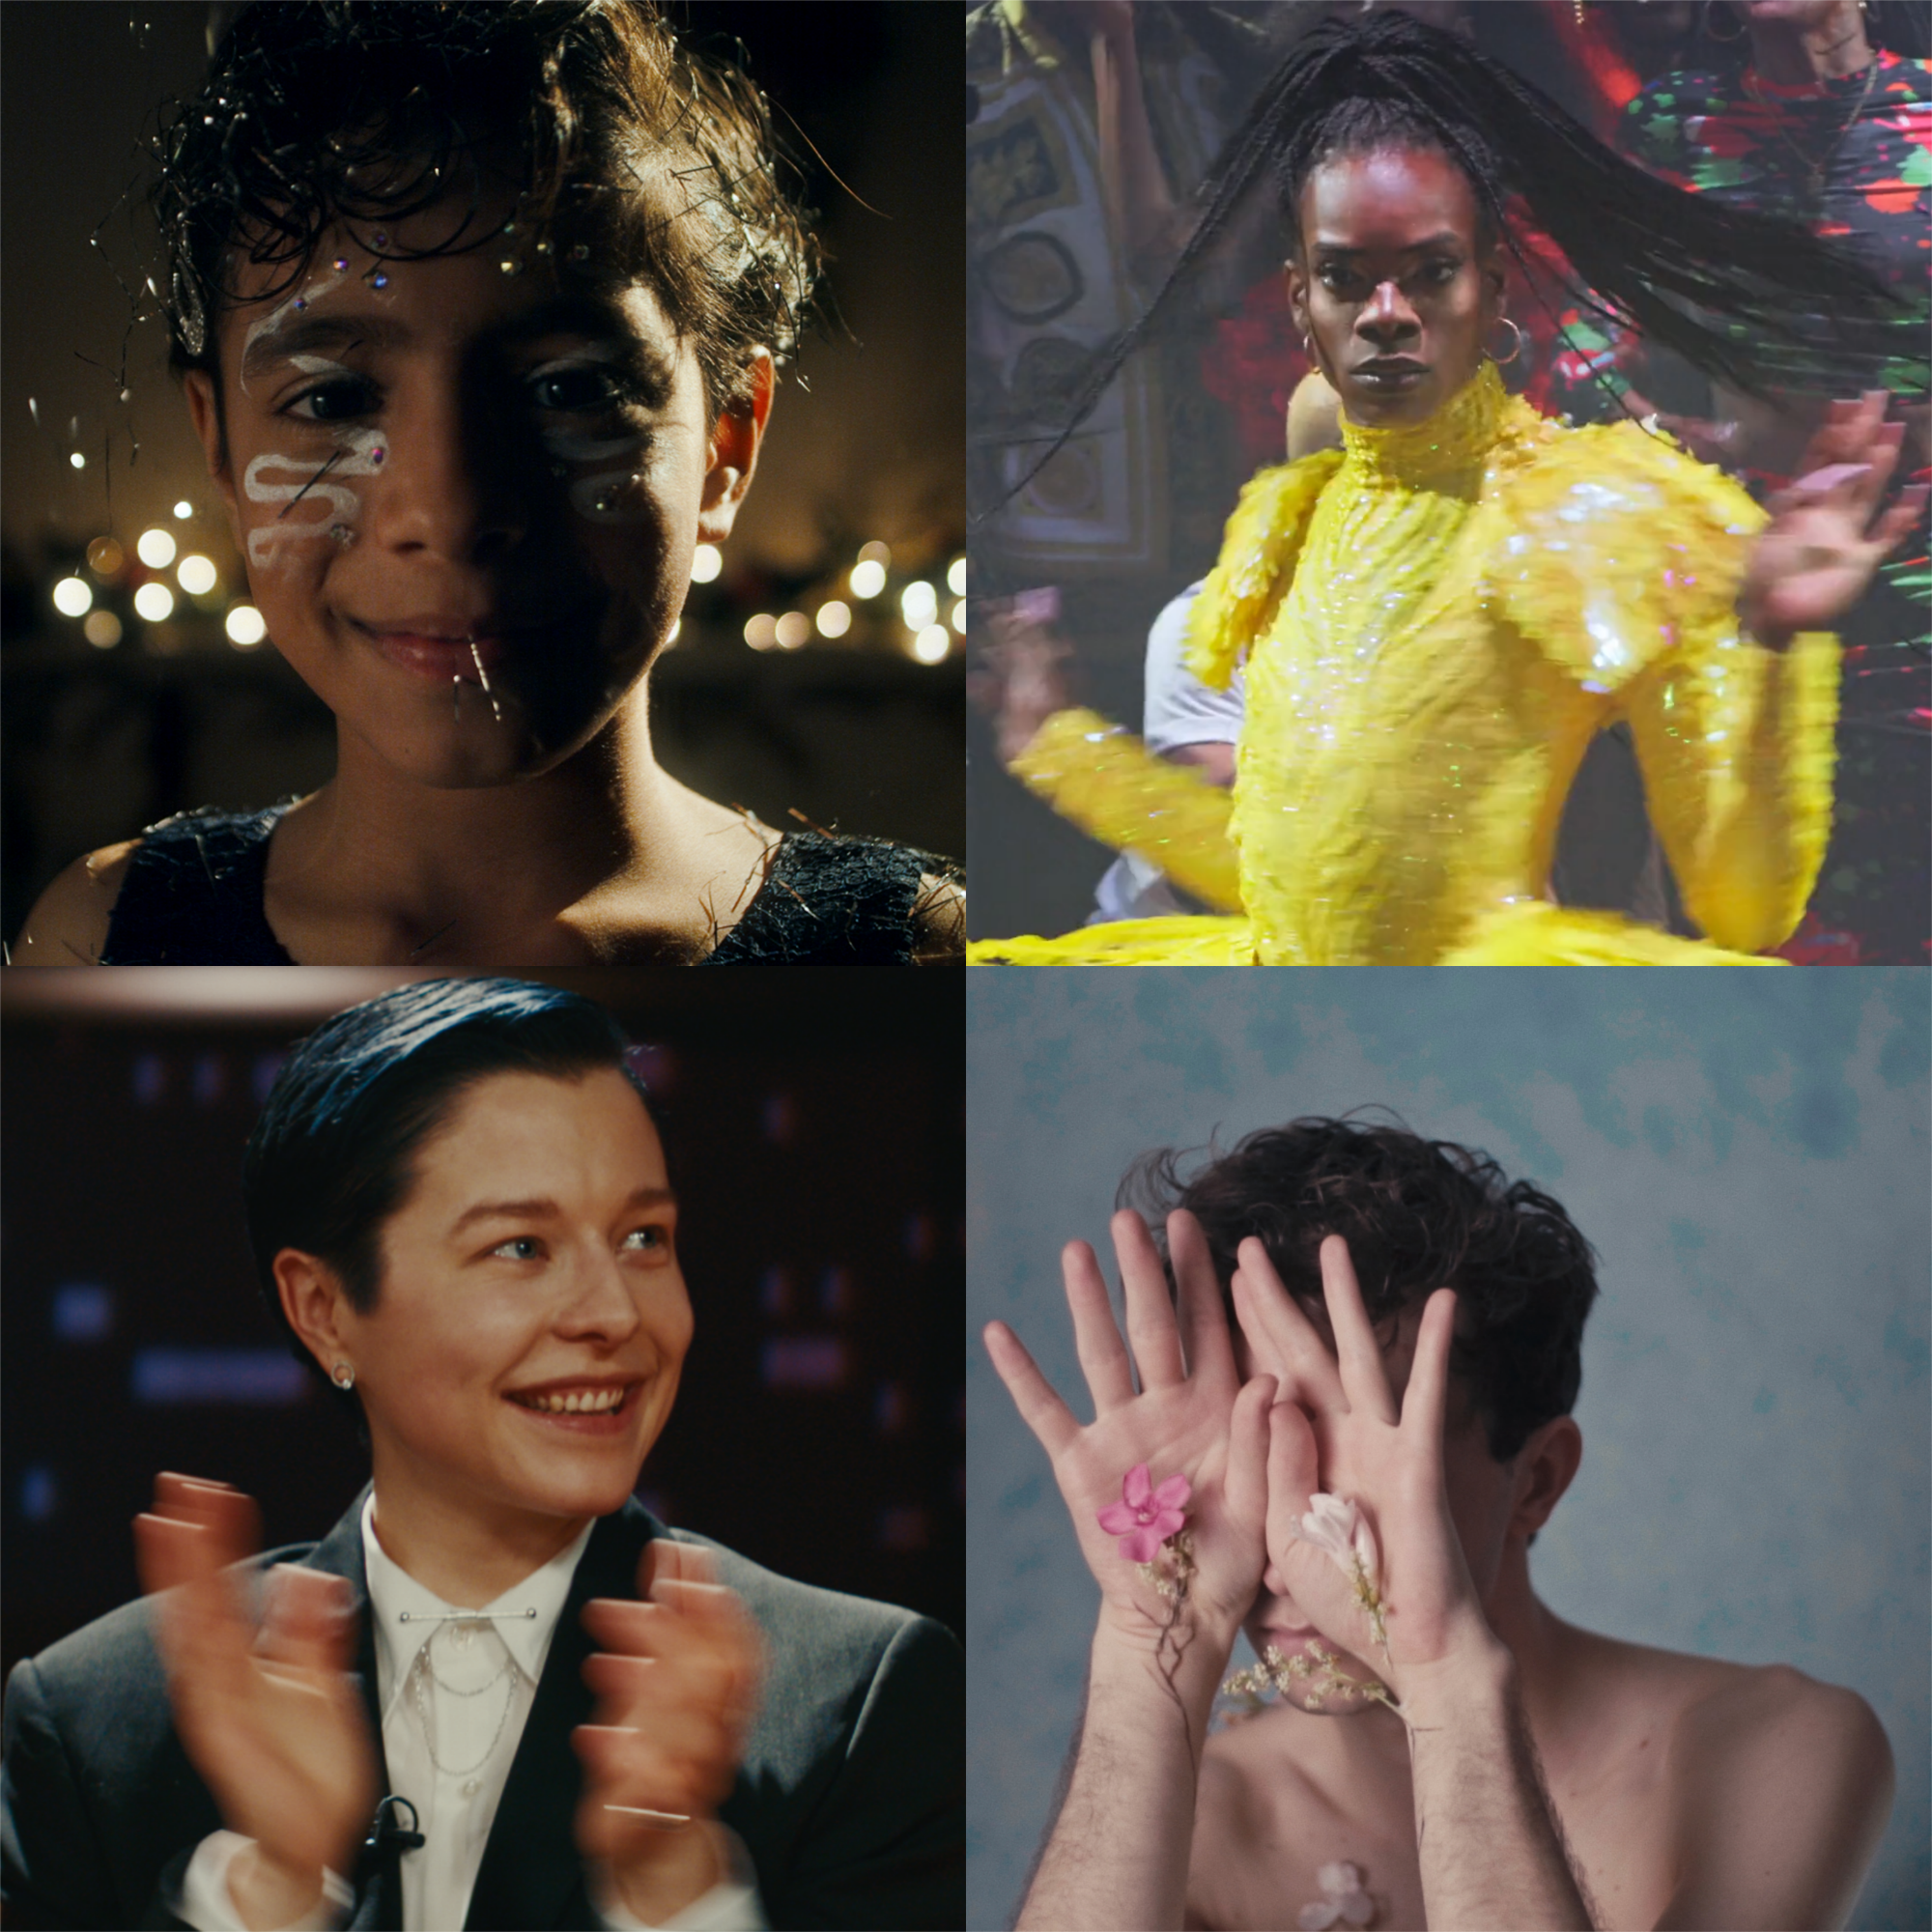 A collage of images: a child with sparkly make-up, someone voguing, Emma D'Arcy in a suit, and someone covering their face with flowers on their palms.